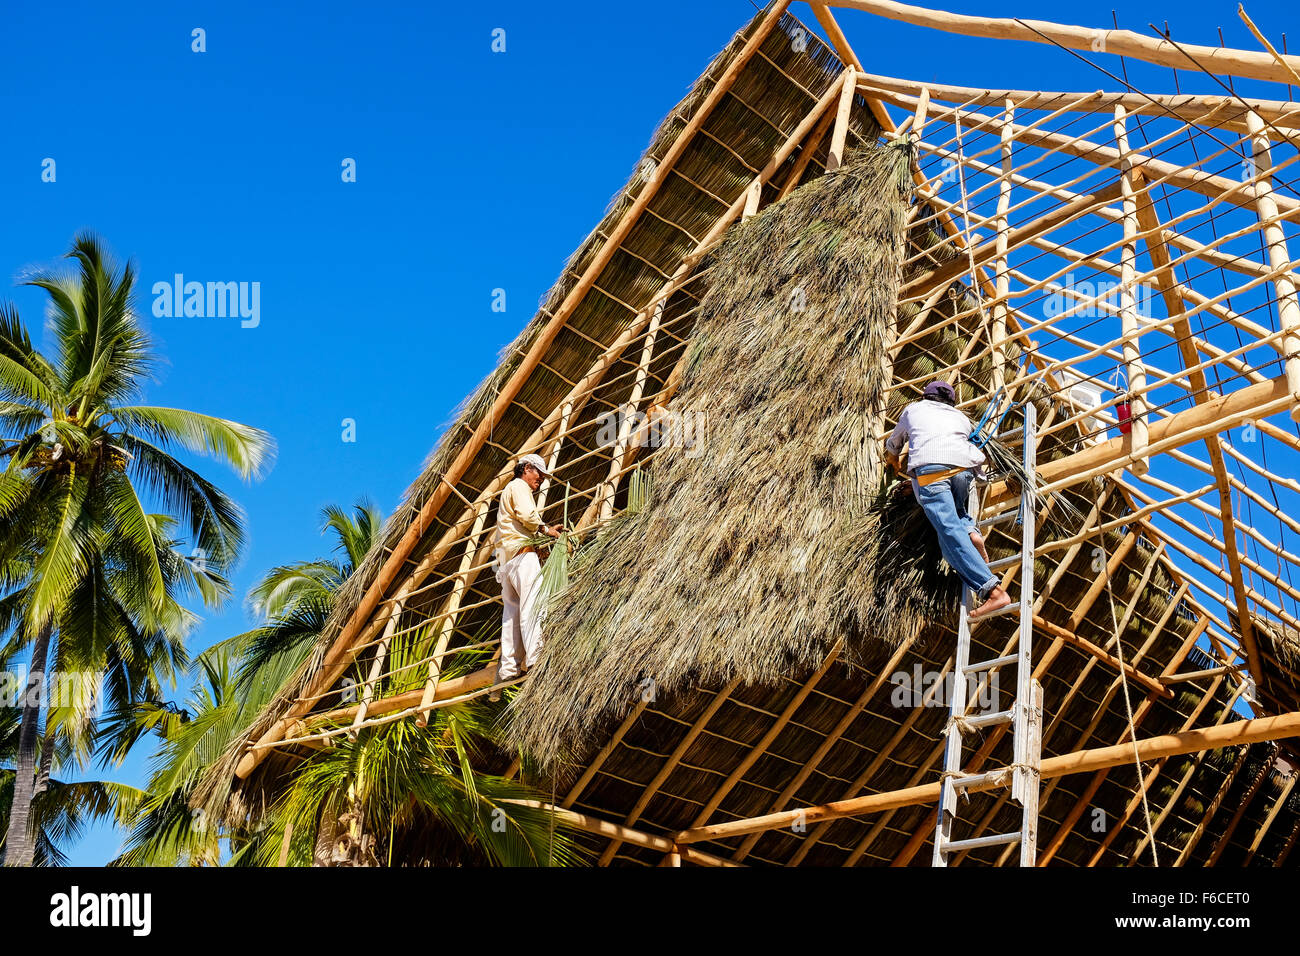 Men constructing a building using bamboo and wooden frame and covered with palm leaves and grass, Puerto Vallarta, Mexico Stock Photo